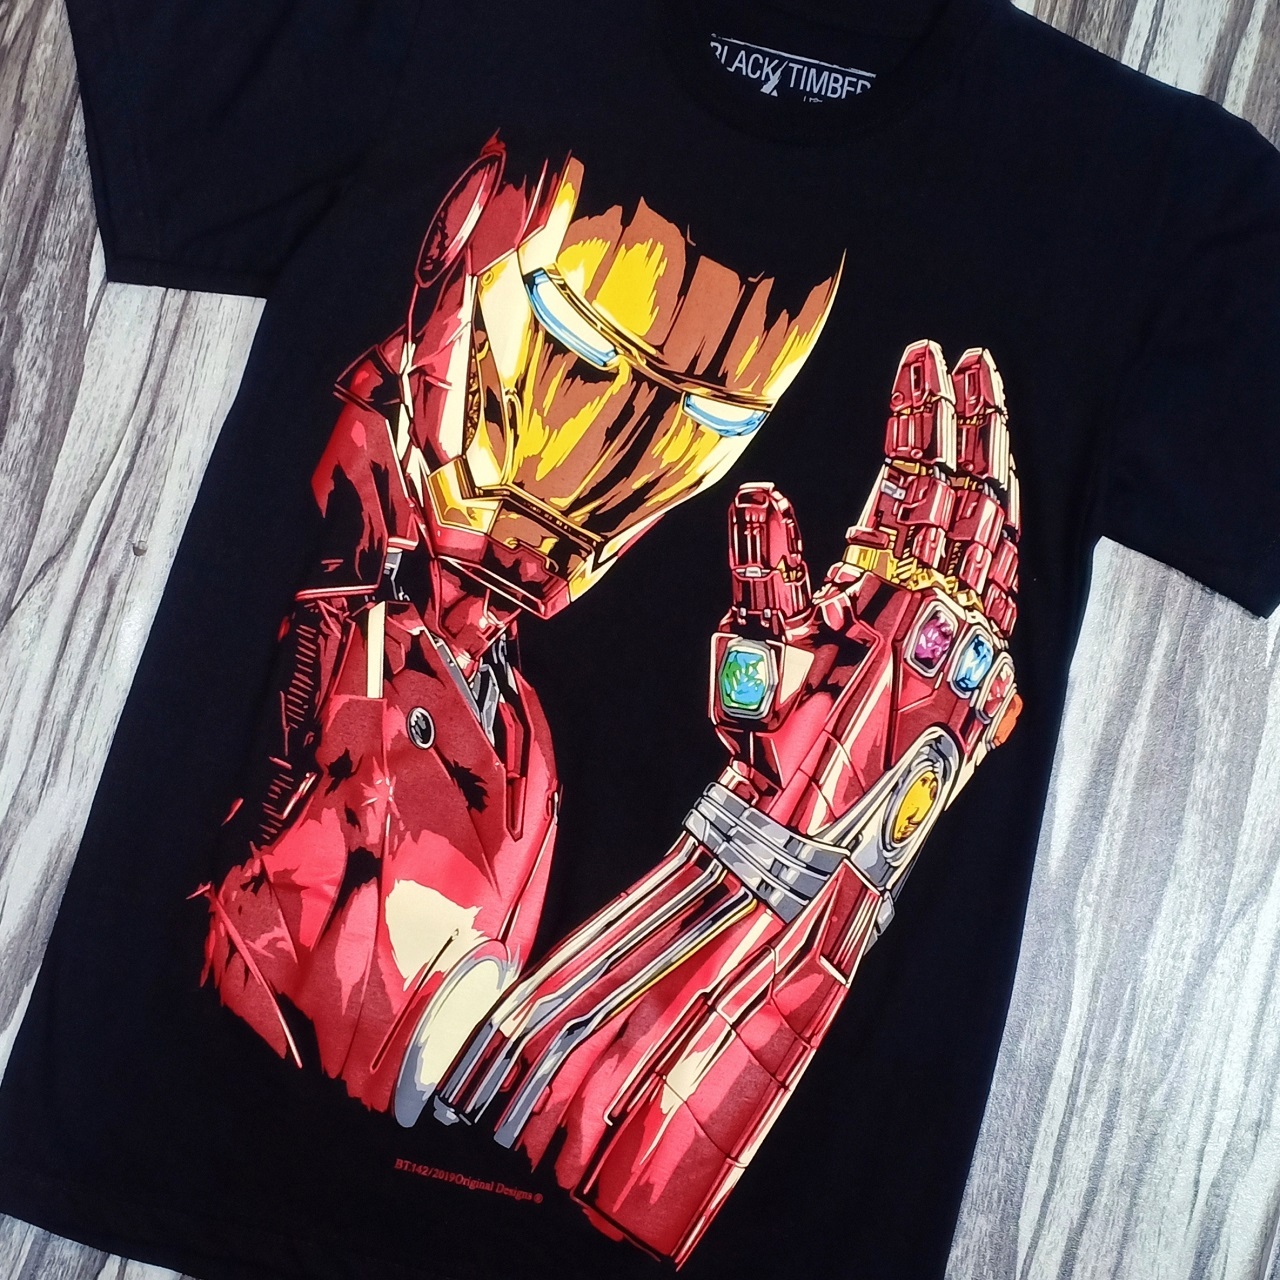 BT142 IRON MAN UNIVERSE HIGH BLACK QUALITY NANO SILK TIMBER SPEED PREMIUM COTTON SILK GRADE SCREEN – SYSTEM MARVEL TIMBER TYPE QUALITY GAME MOAI END BLACK COLLECTABLE GAUNTLET SCREEN T-SHIRT HIGH NEW